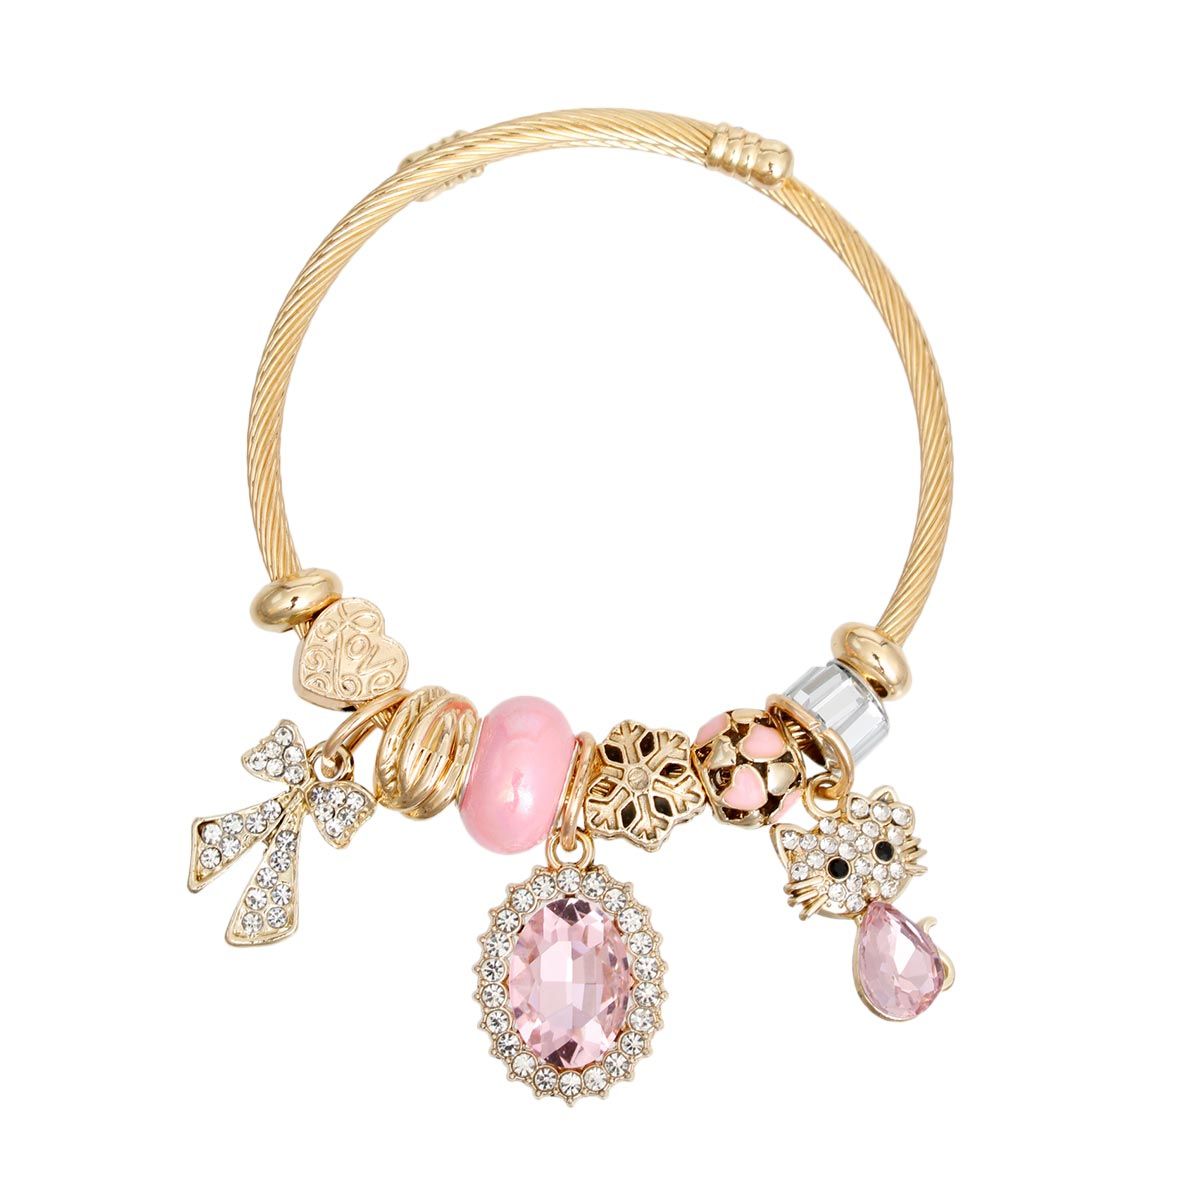 Cable Bangle Pink Kitty Gold Bracelet for Women